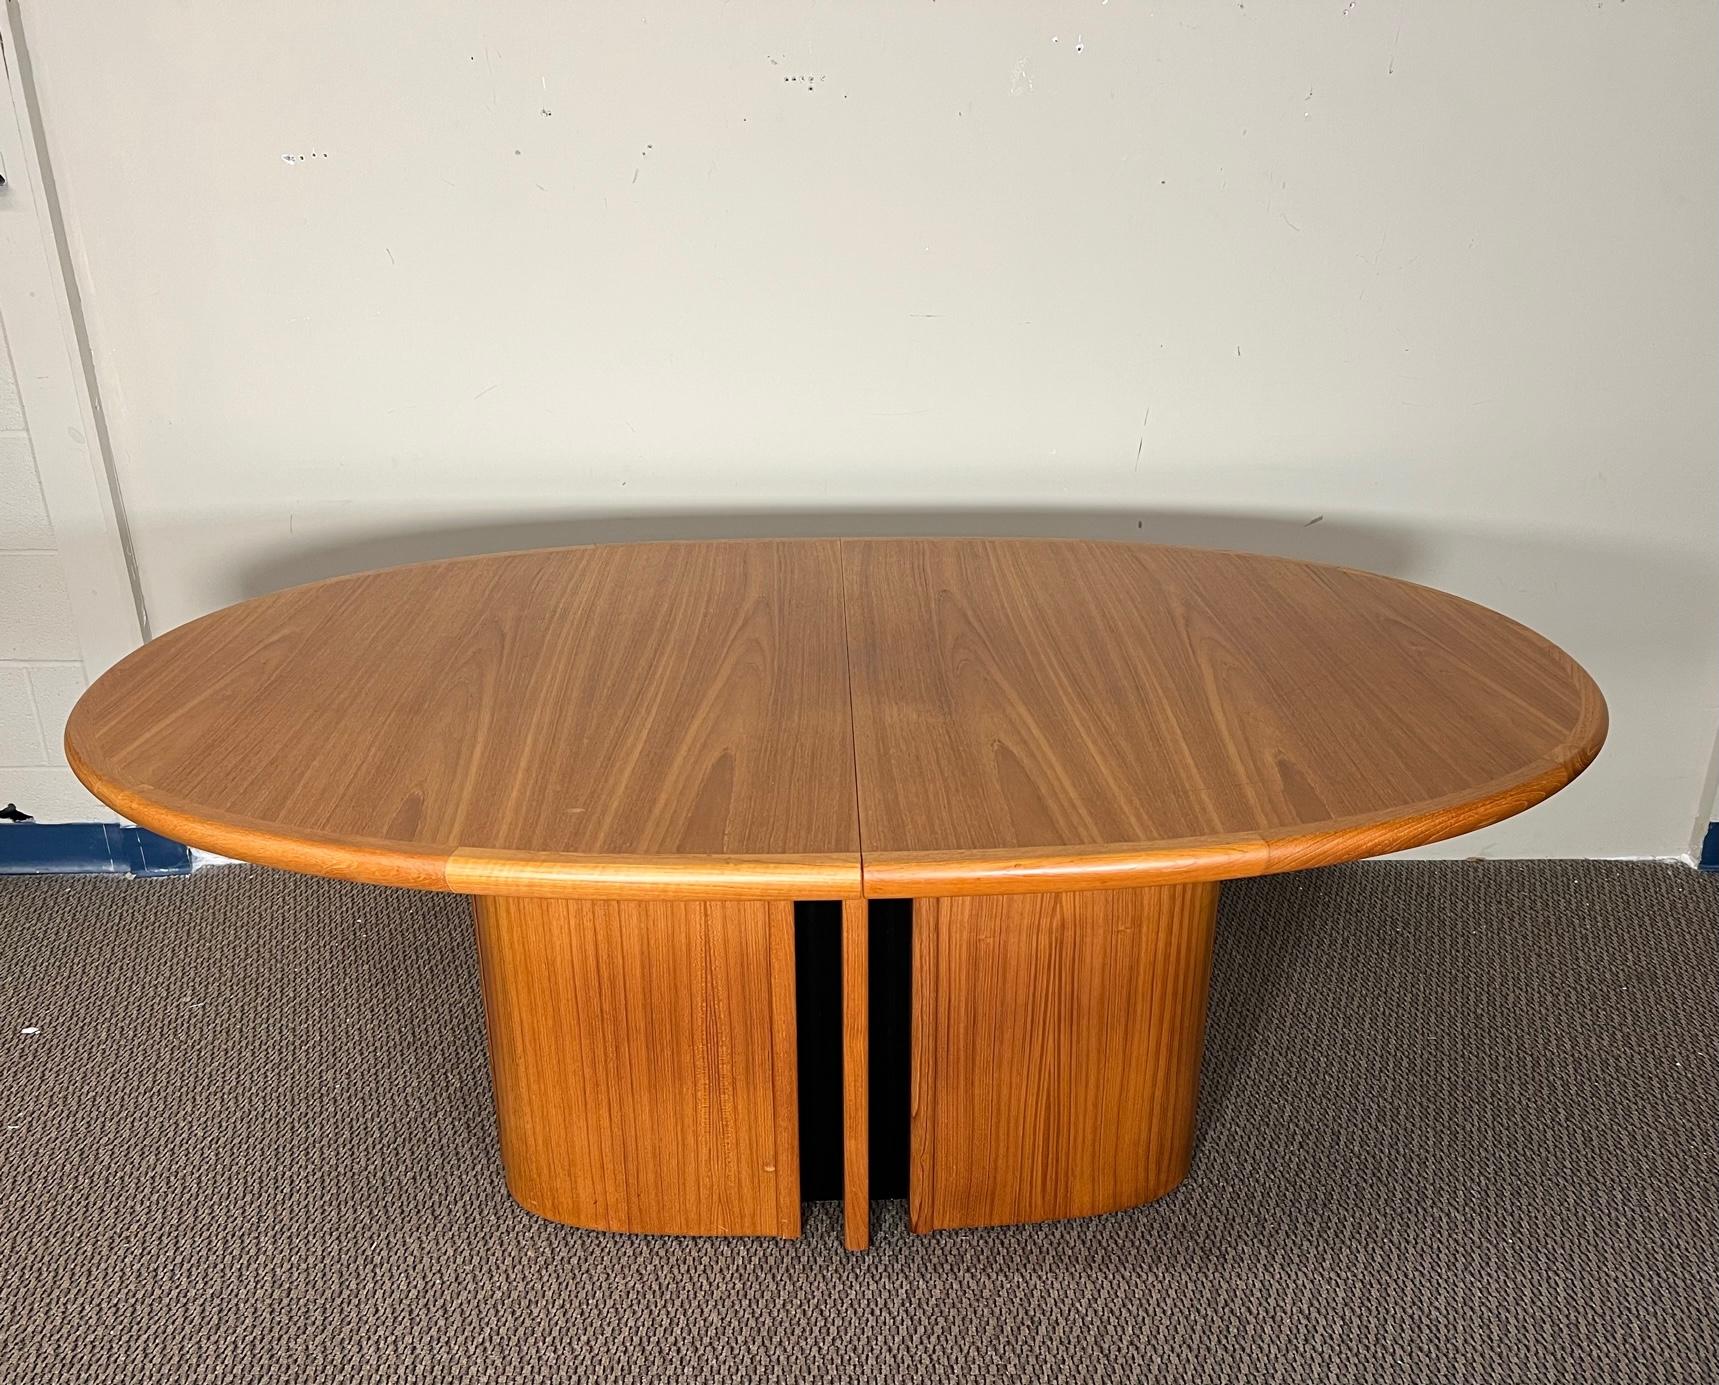 This is an oval teak dining table with pop up butterfly extension leaf that is hidden inside the table. Made by Skovby. The folding leaf is on a patented spring mechanism. Push down to release and then pull up and fold out. 
Very good condition.